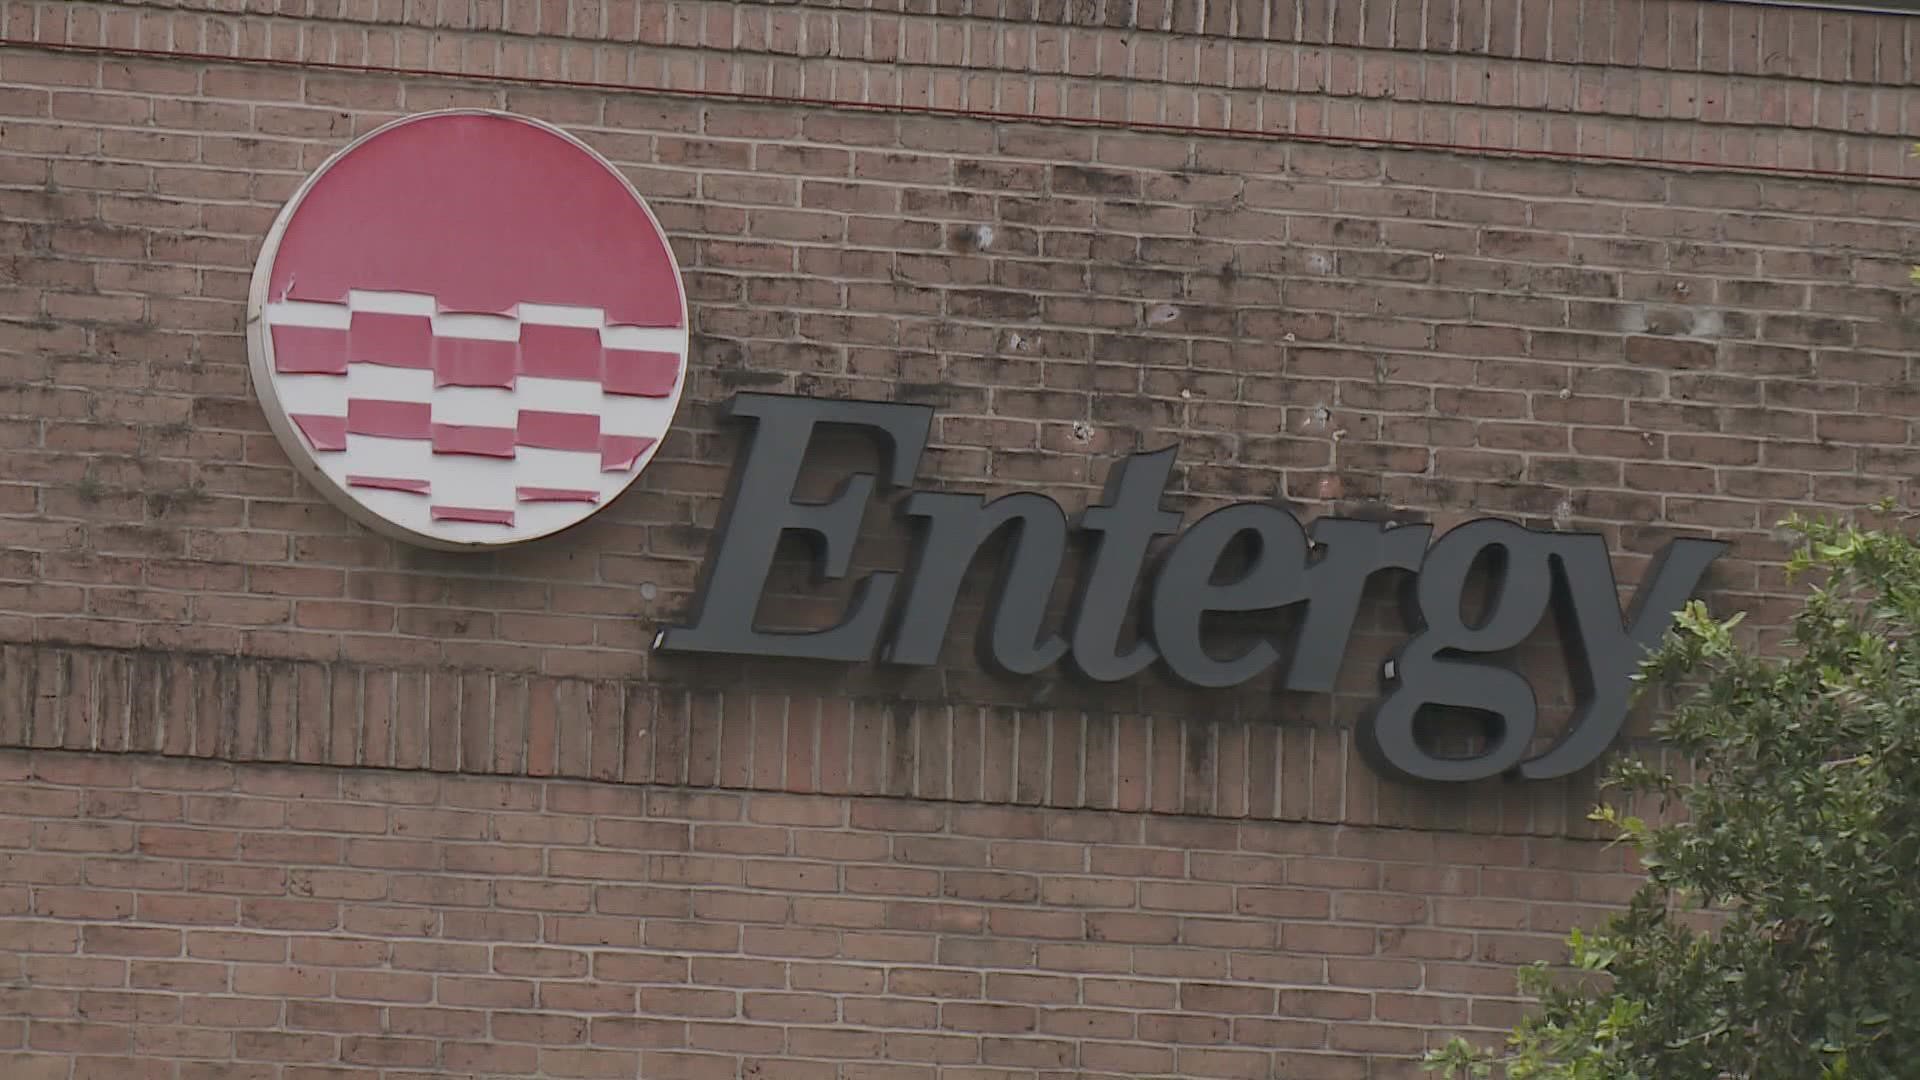 Many who live in the service area have said their bills skyrocketed this summer. Entergy officials said high bills were a result of the cost of natural gas.